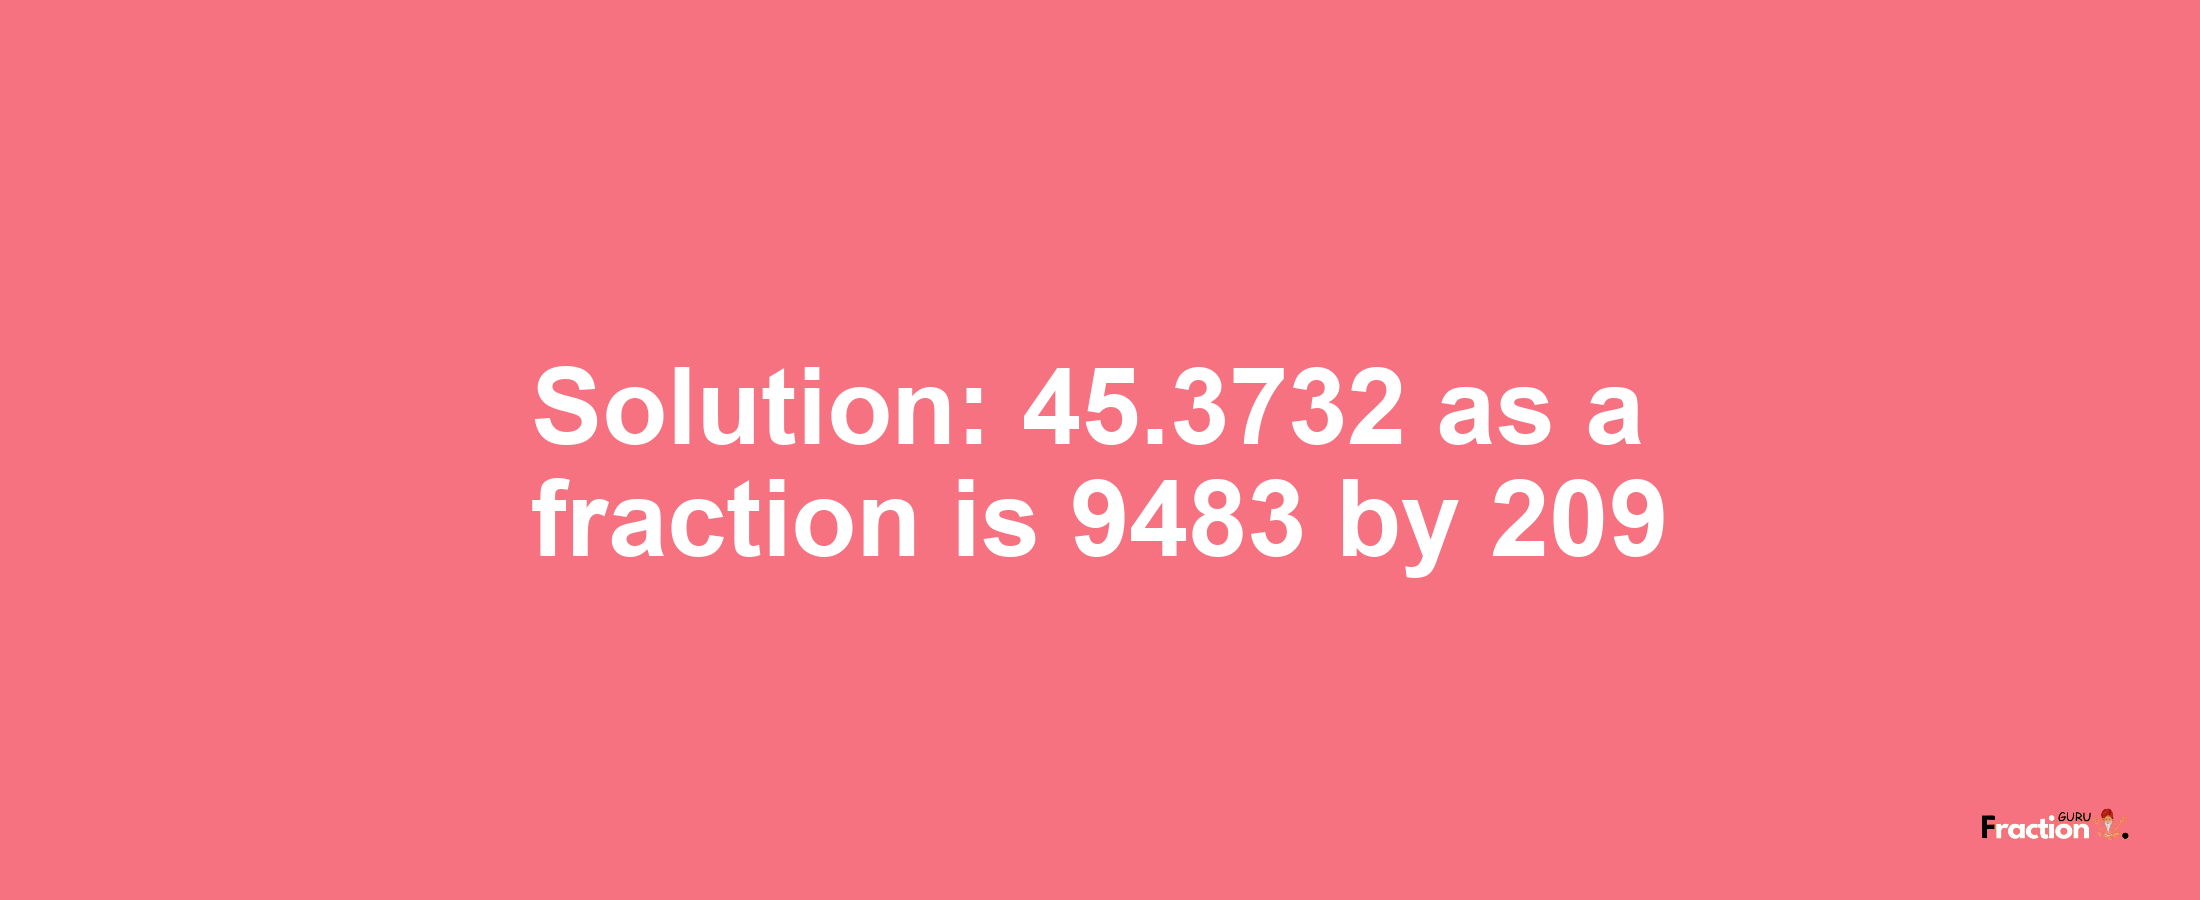 Solution:45.3732 as a fraction is 9483/209